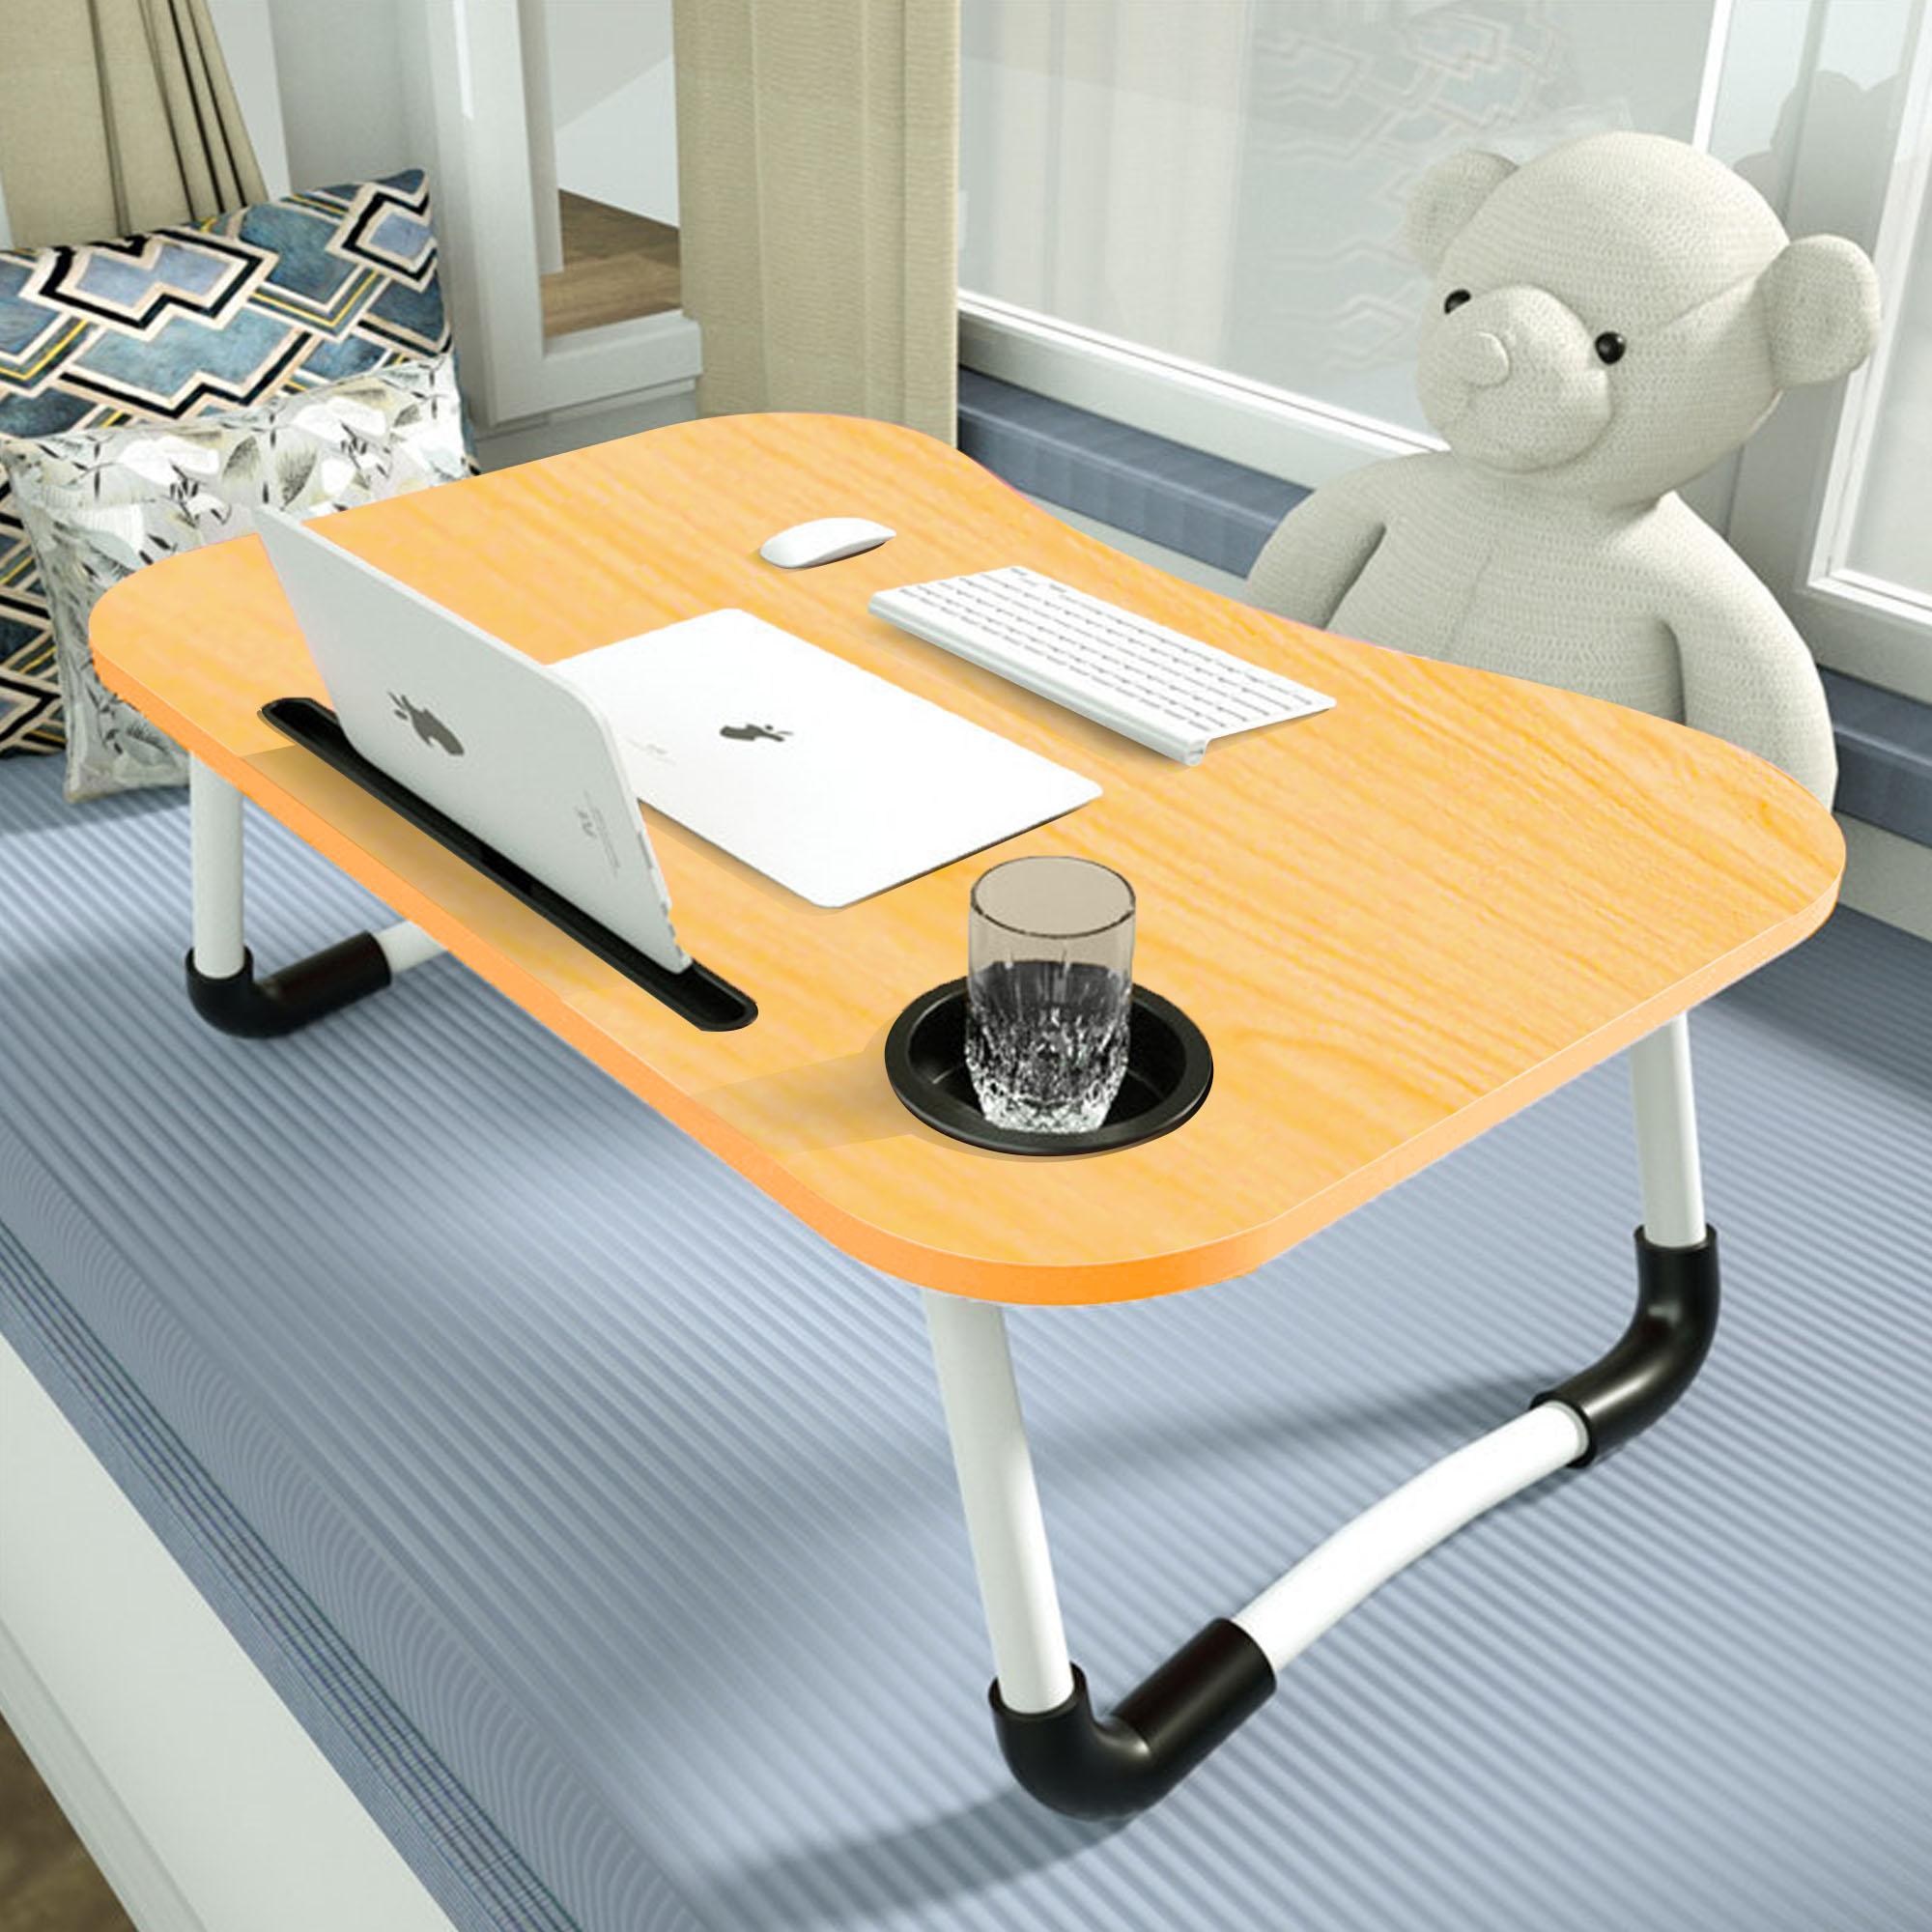 Red Star Folding Table Computer Table Bed Desk